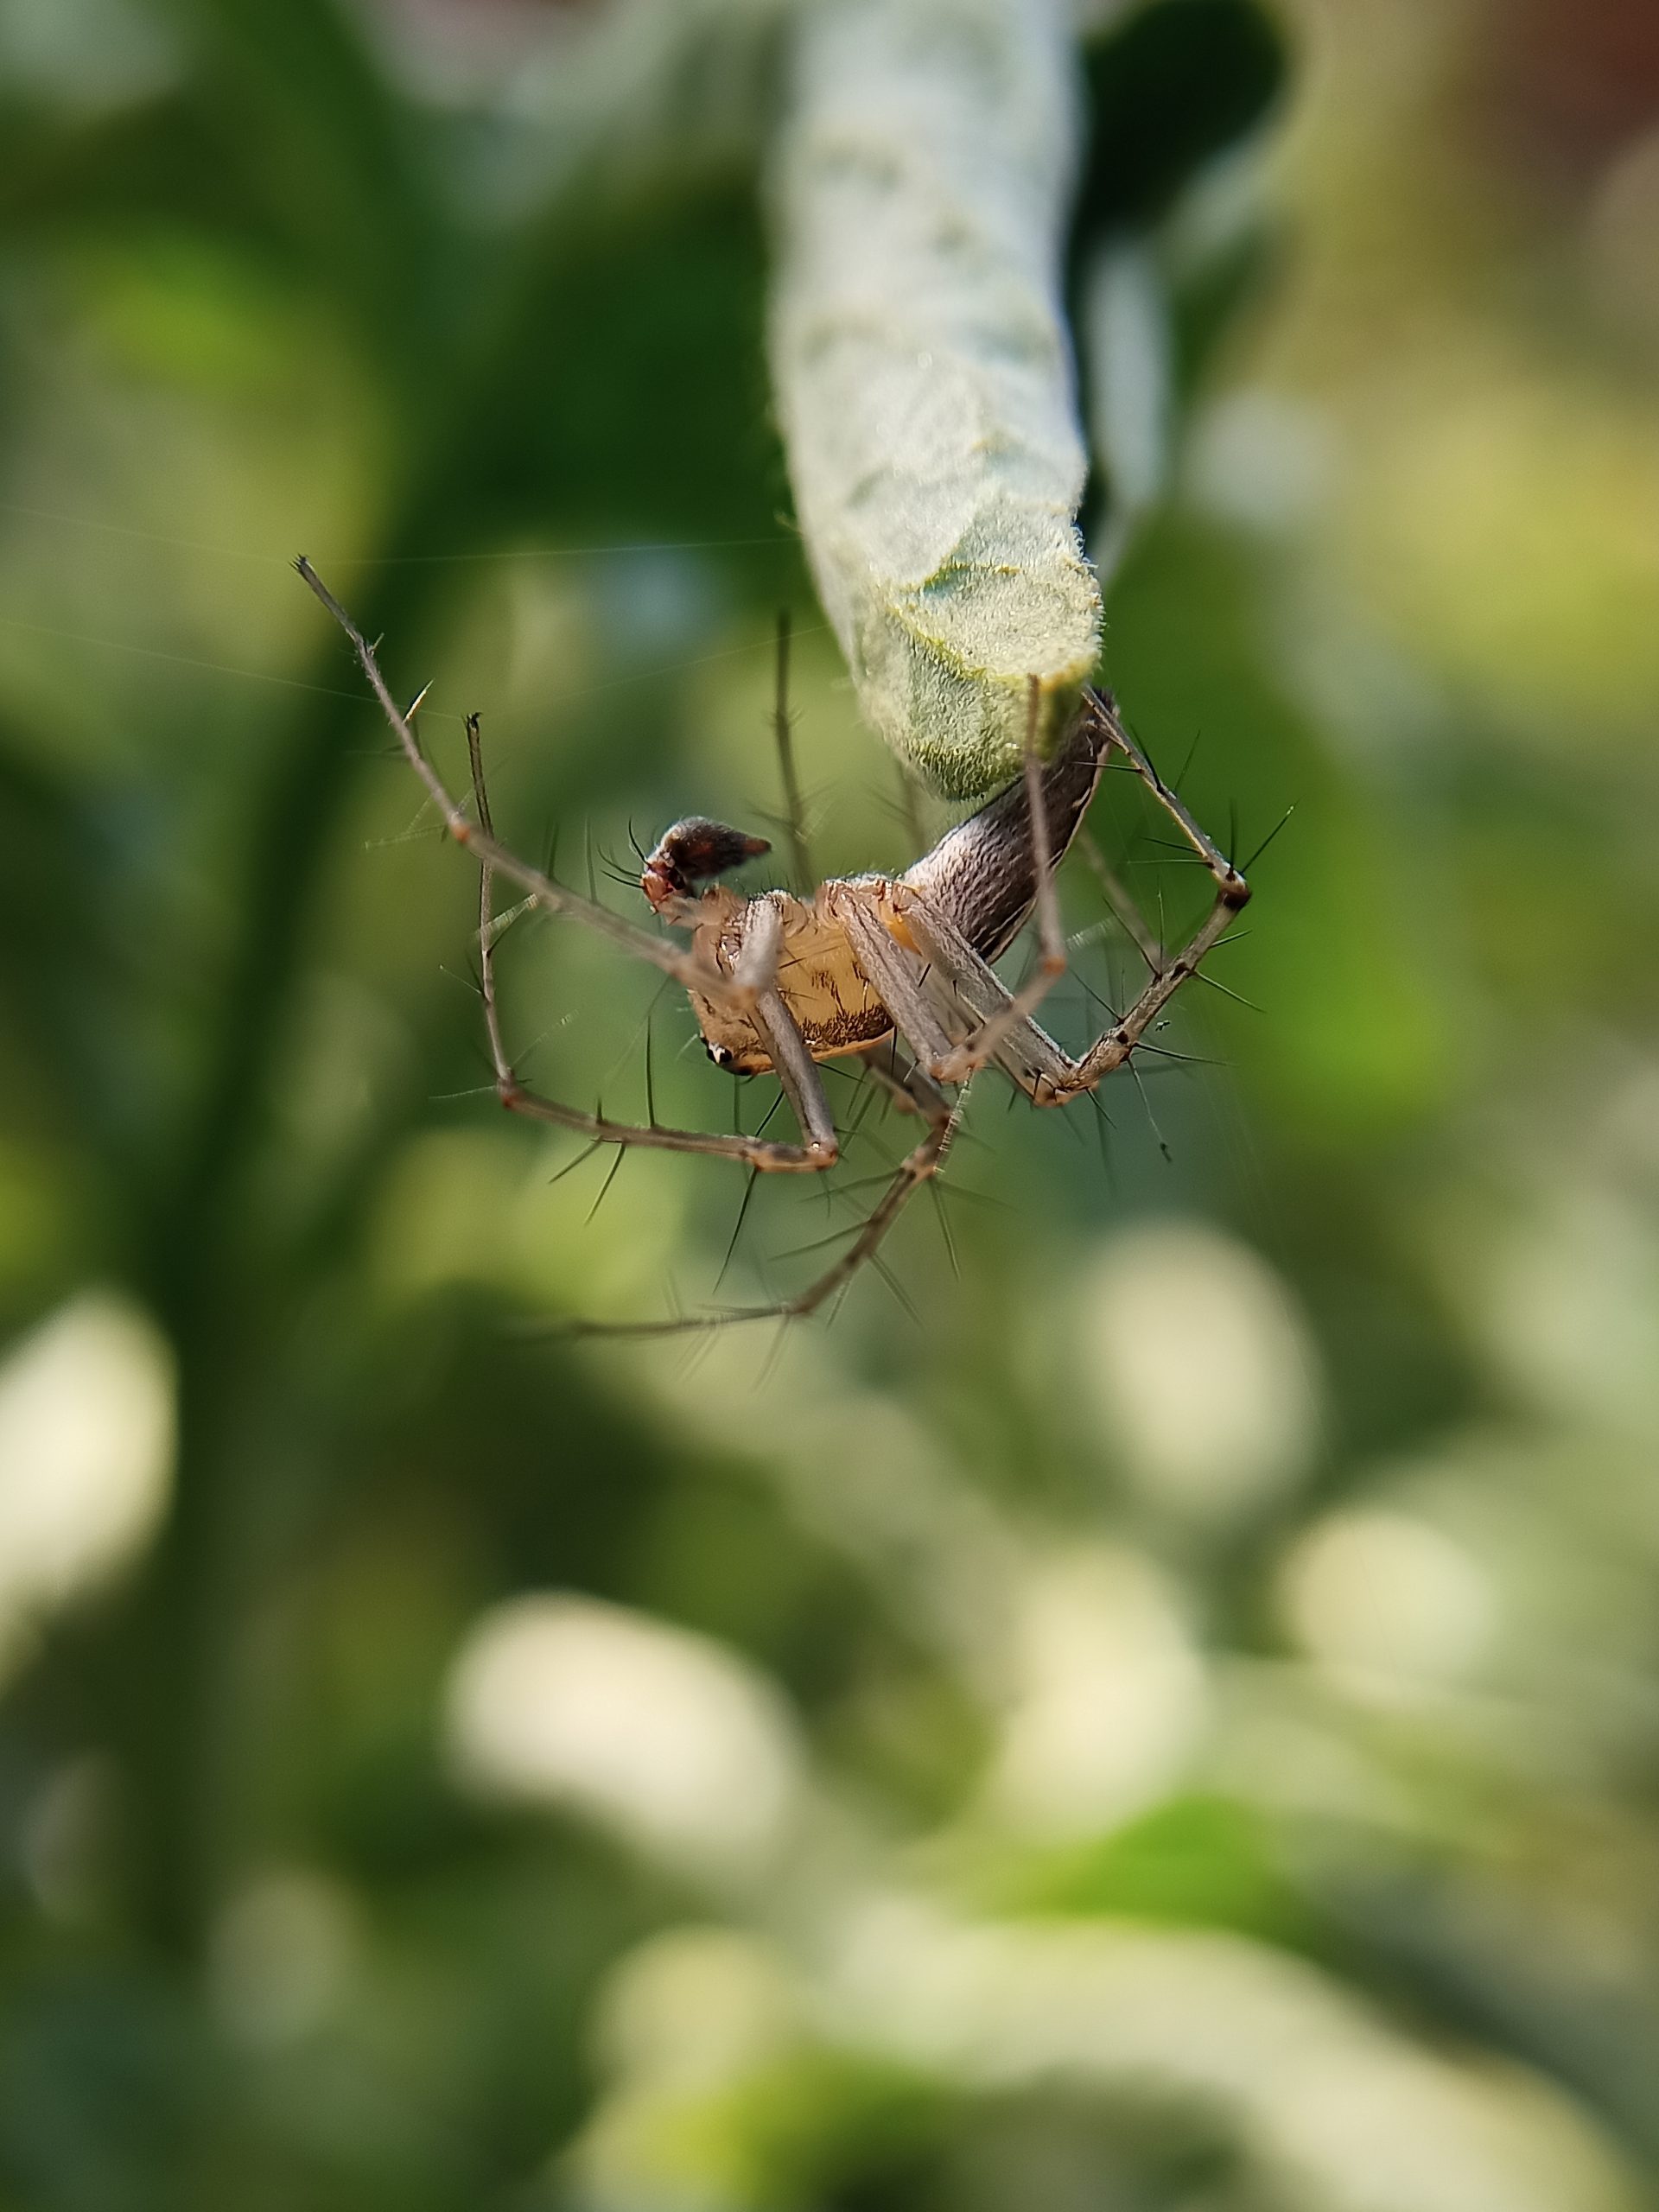 spider on the plant leaf